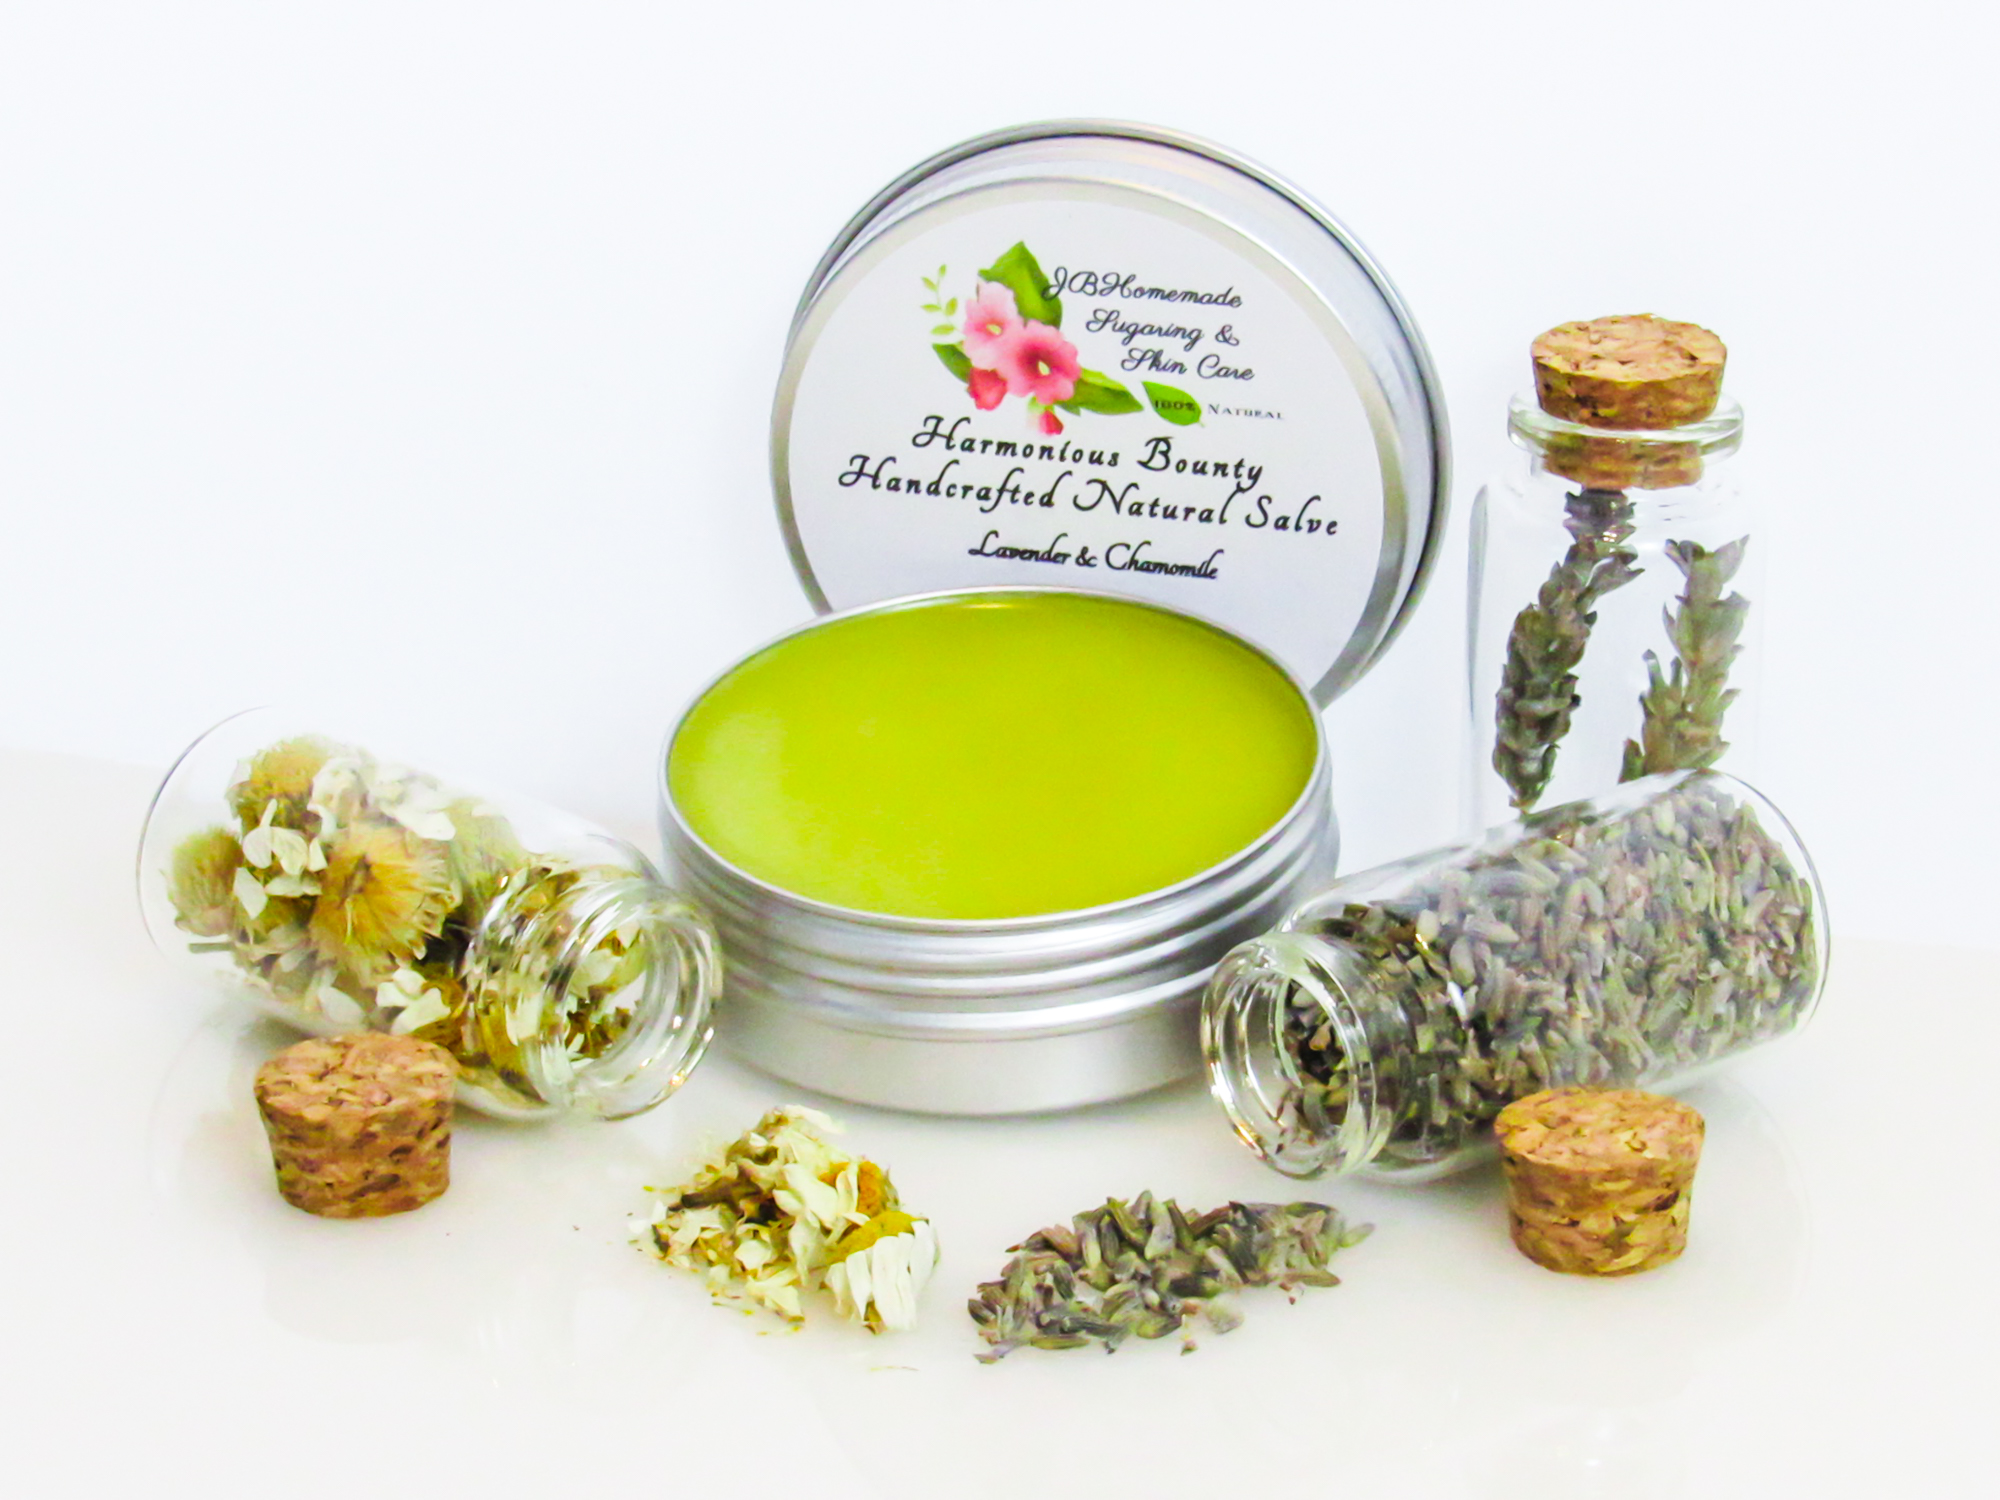 Harmonious Bounty presents its Creamy Natural Skin Salve in Lavender Chamomile, providing a comforting solution for dry skin. The product is showcased in an overhead right-angled view of an open tin, with its lid placed behind revealing the label. Encircling the salve are petite corked glass bottles filled with Lavender and Chamomile, accompanied by sprinkles of these soothing ingredients.